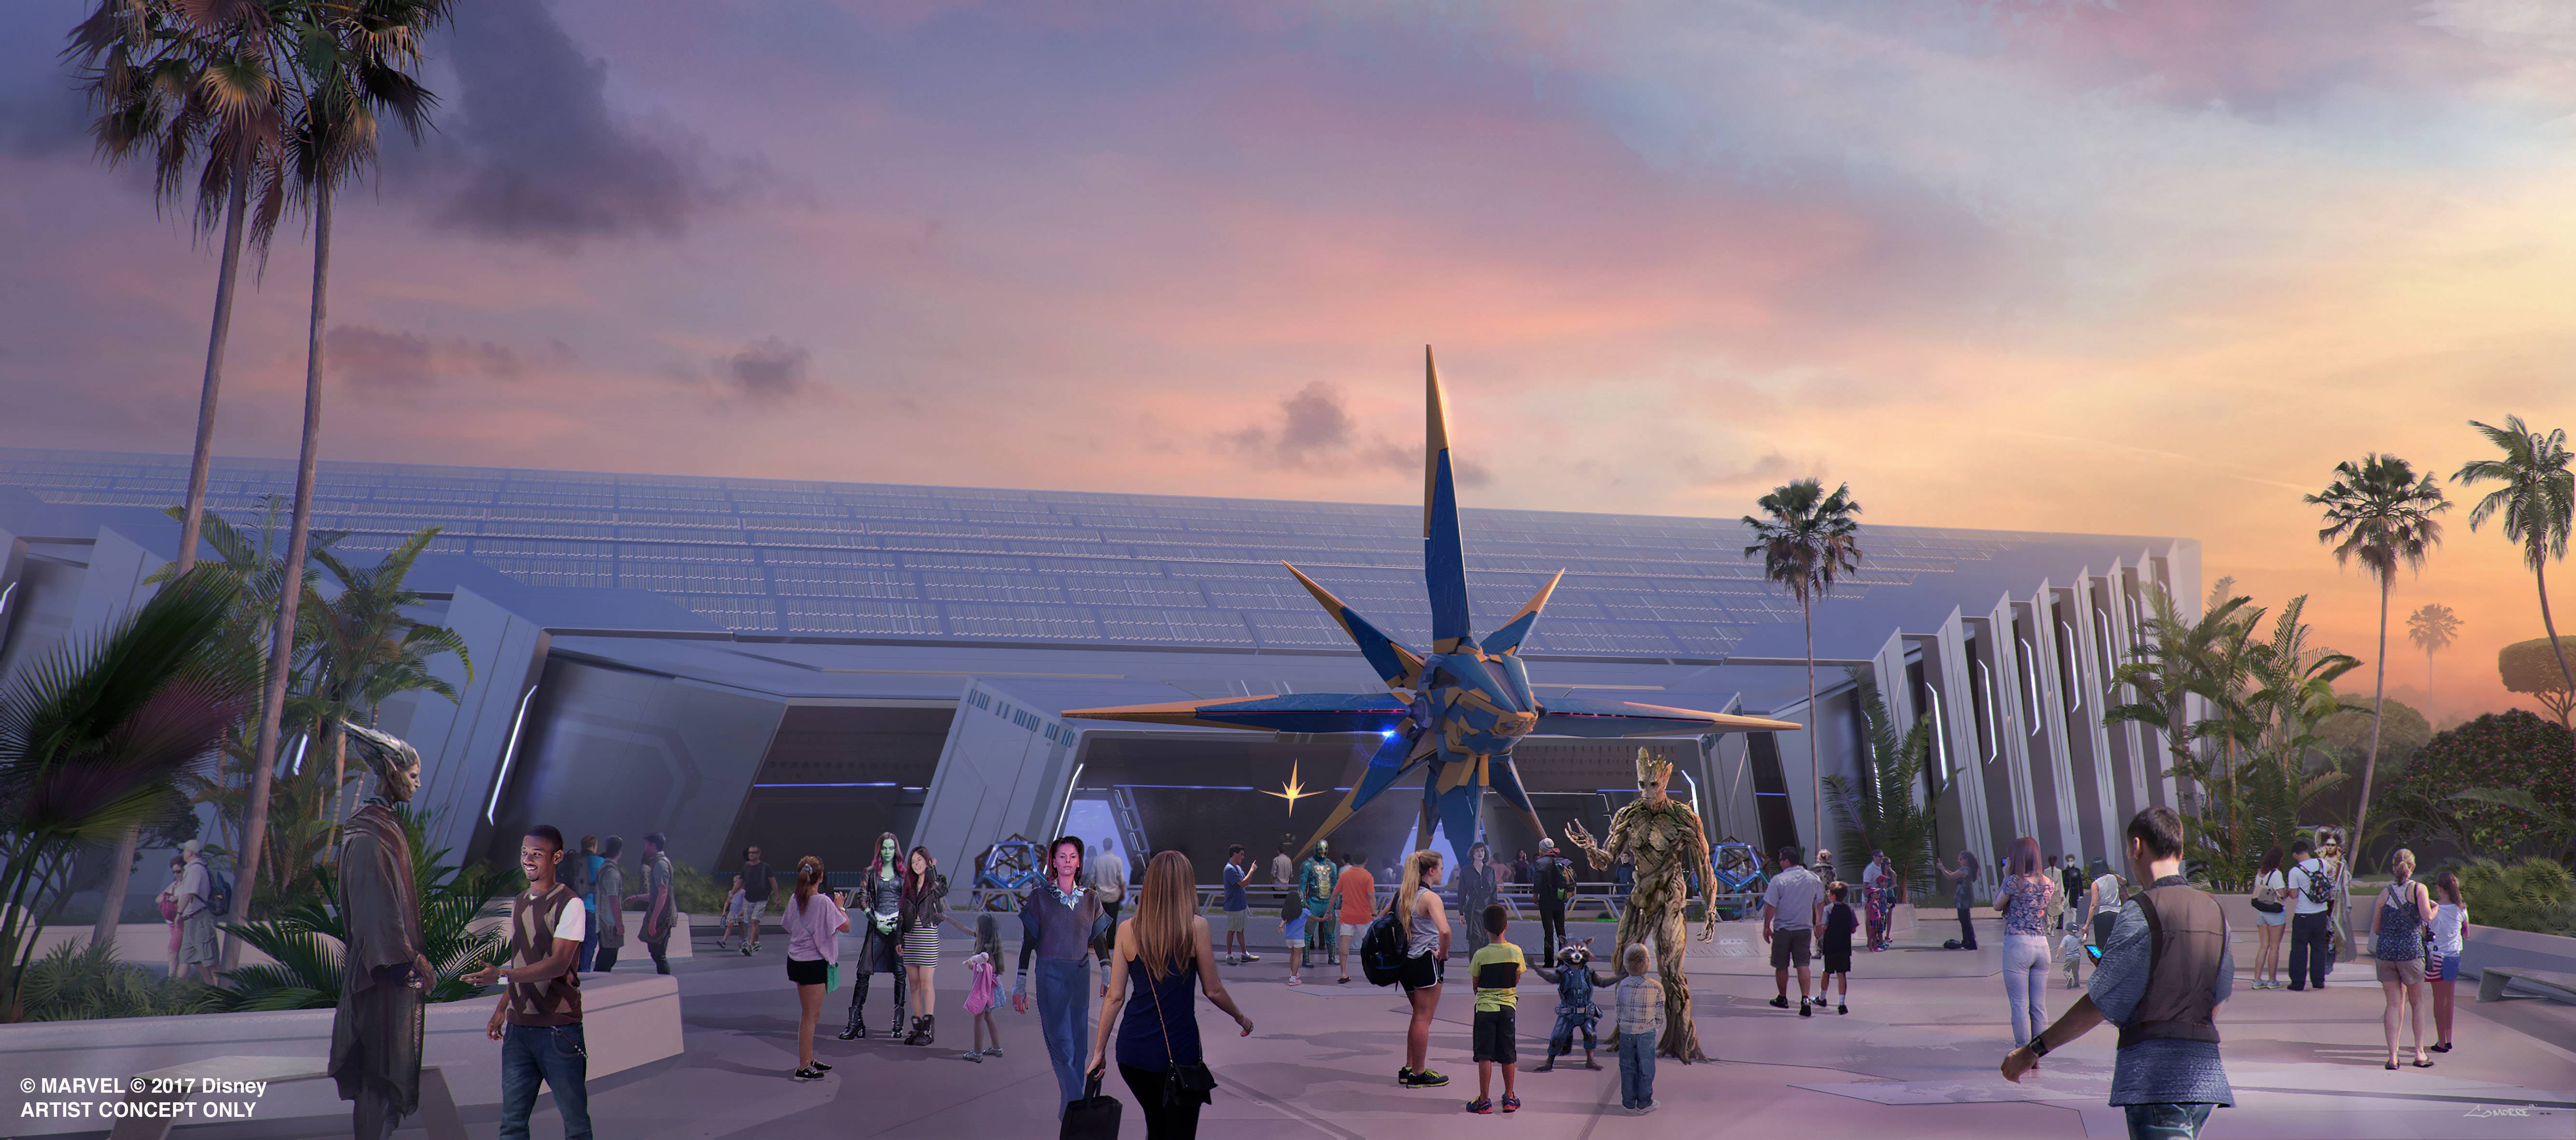 PHOTO - Guardians of the Galaxy coaster ride vehicle concept art